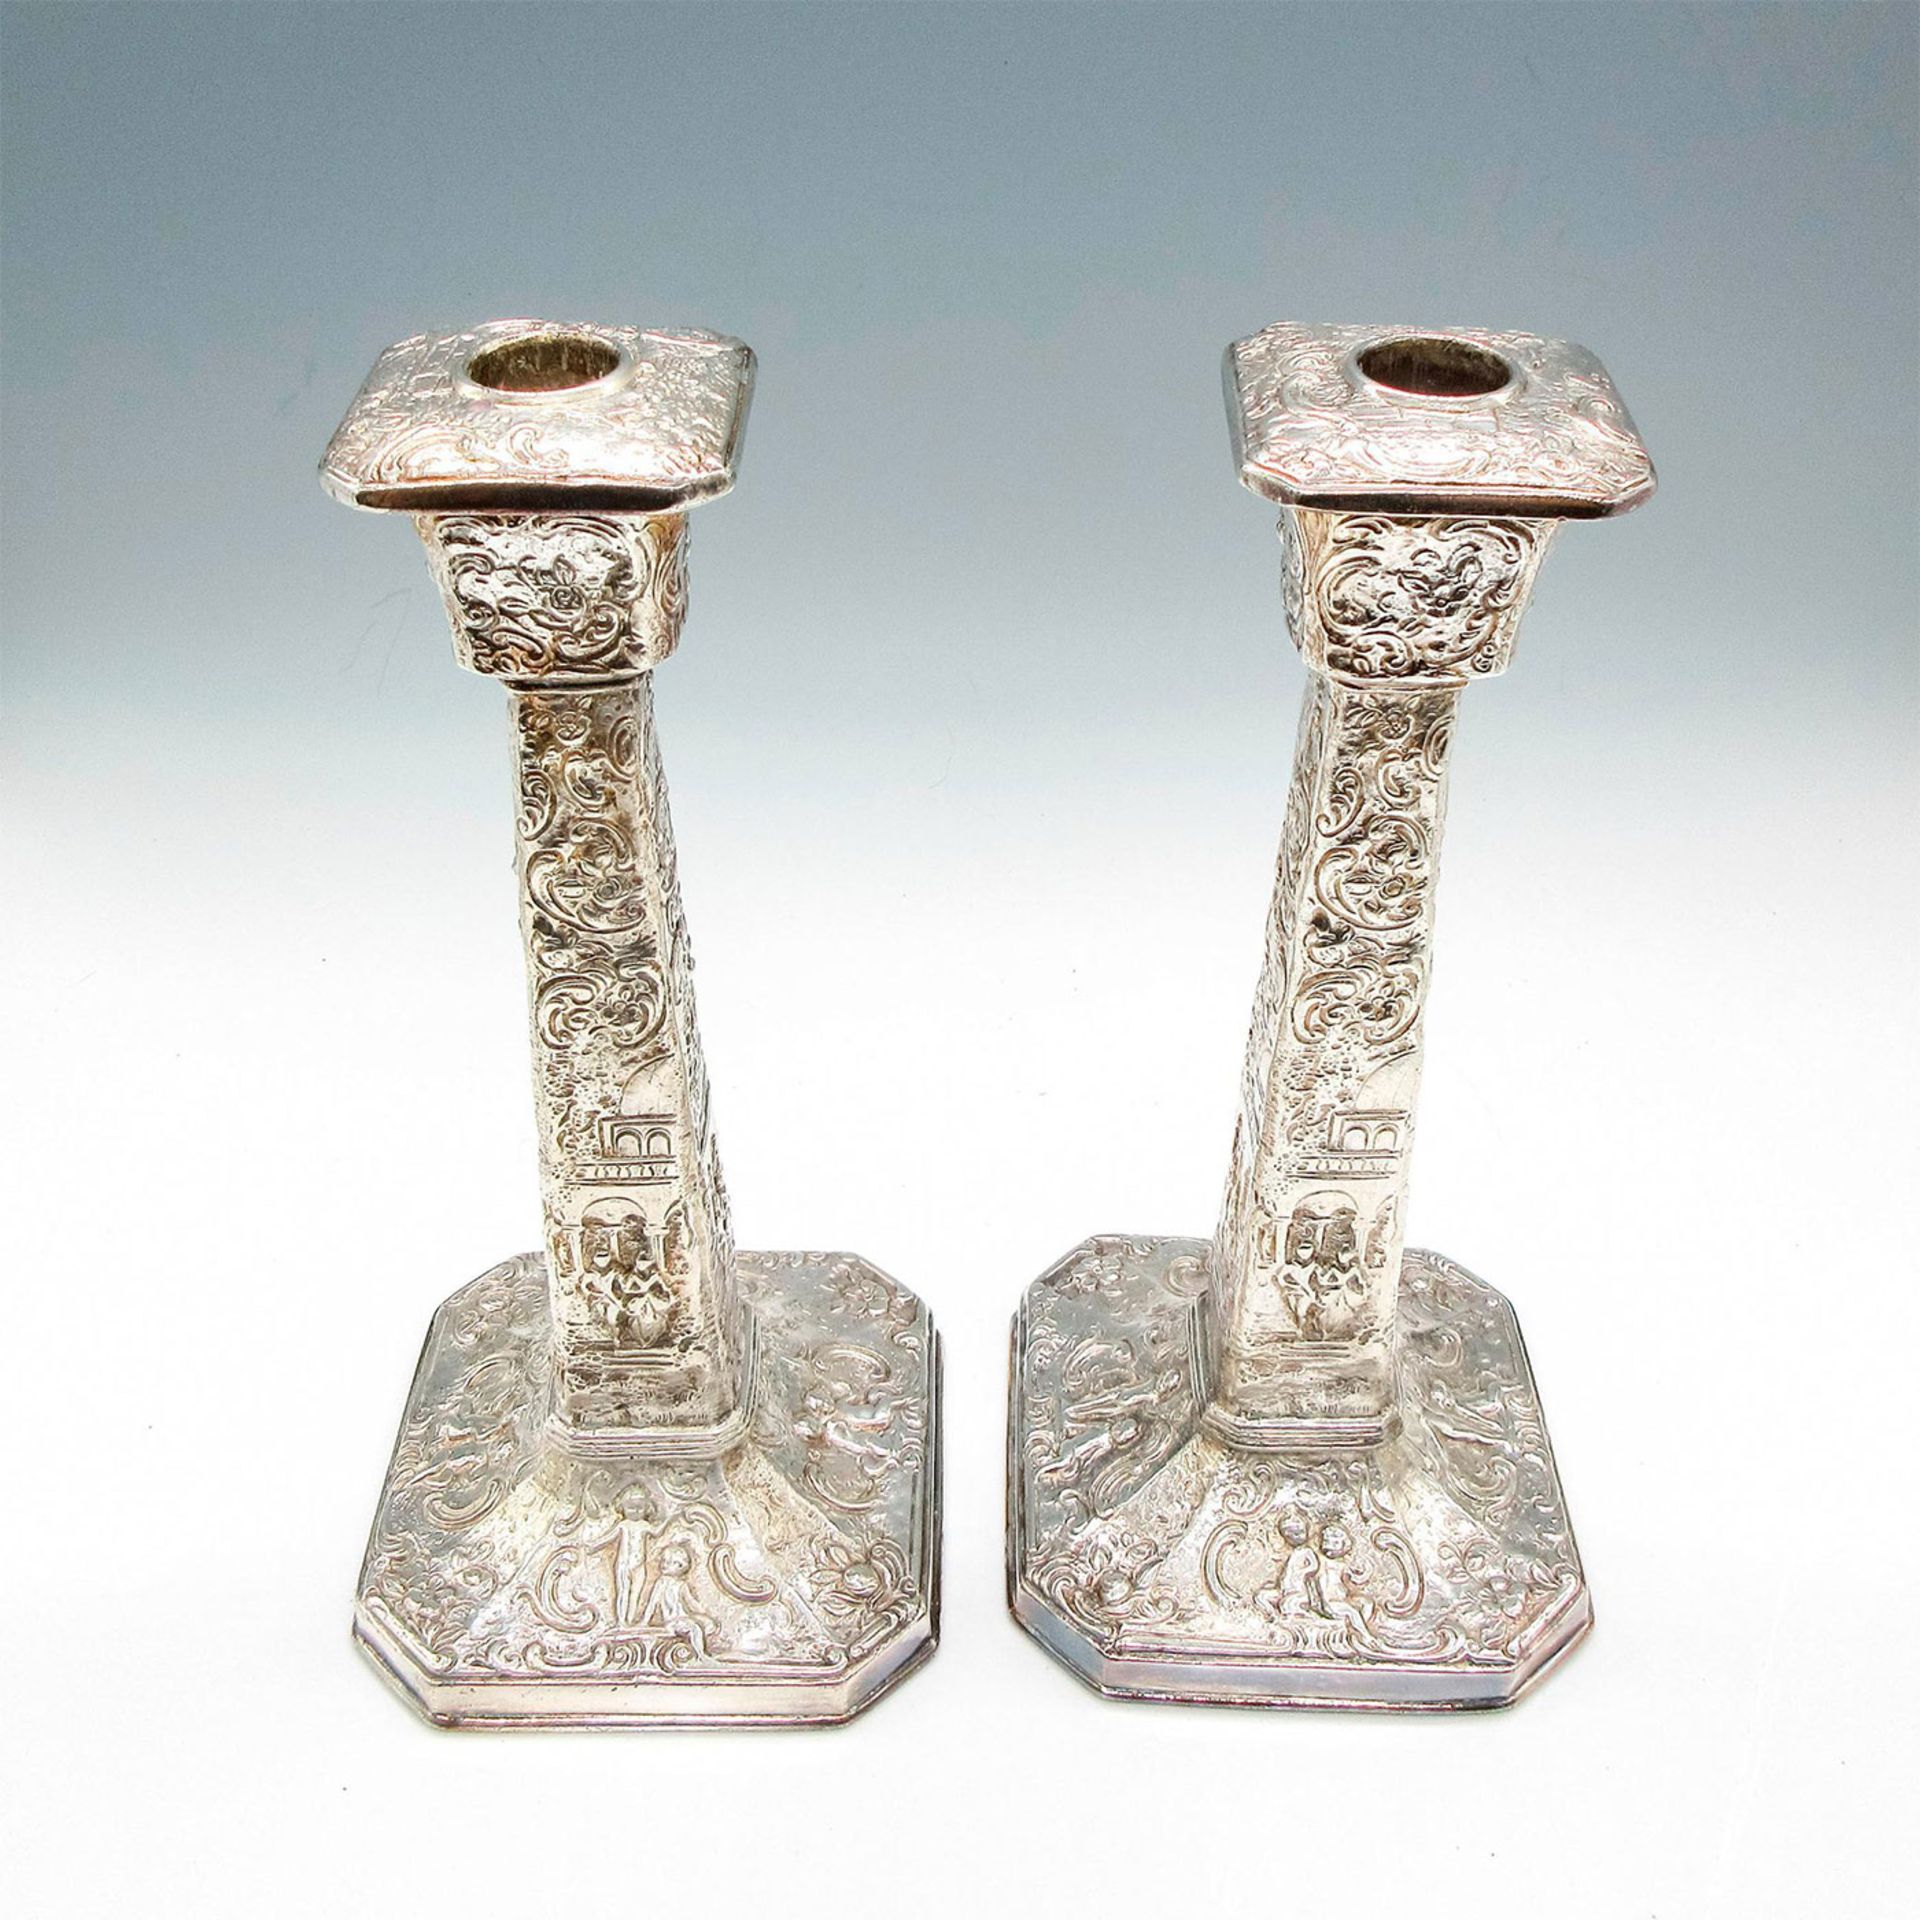 2pc Weidlich Brothers Silver Plated Candlestick Holders 2342 - Image 2 of 3